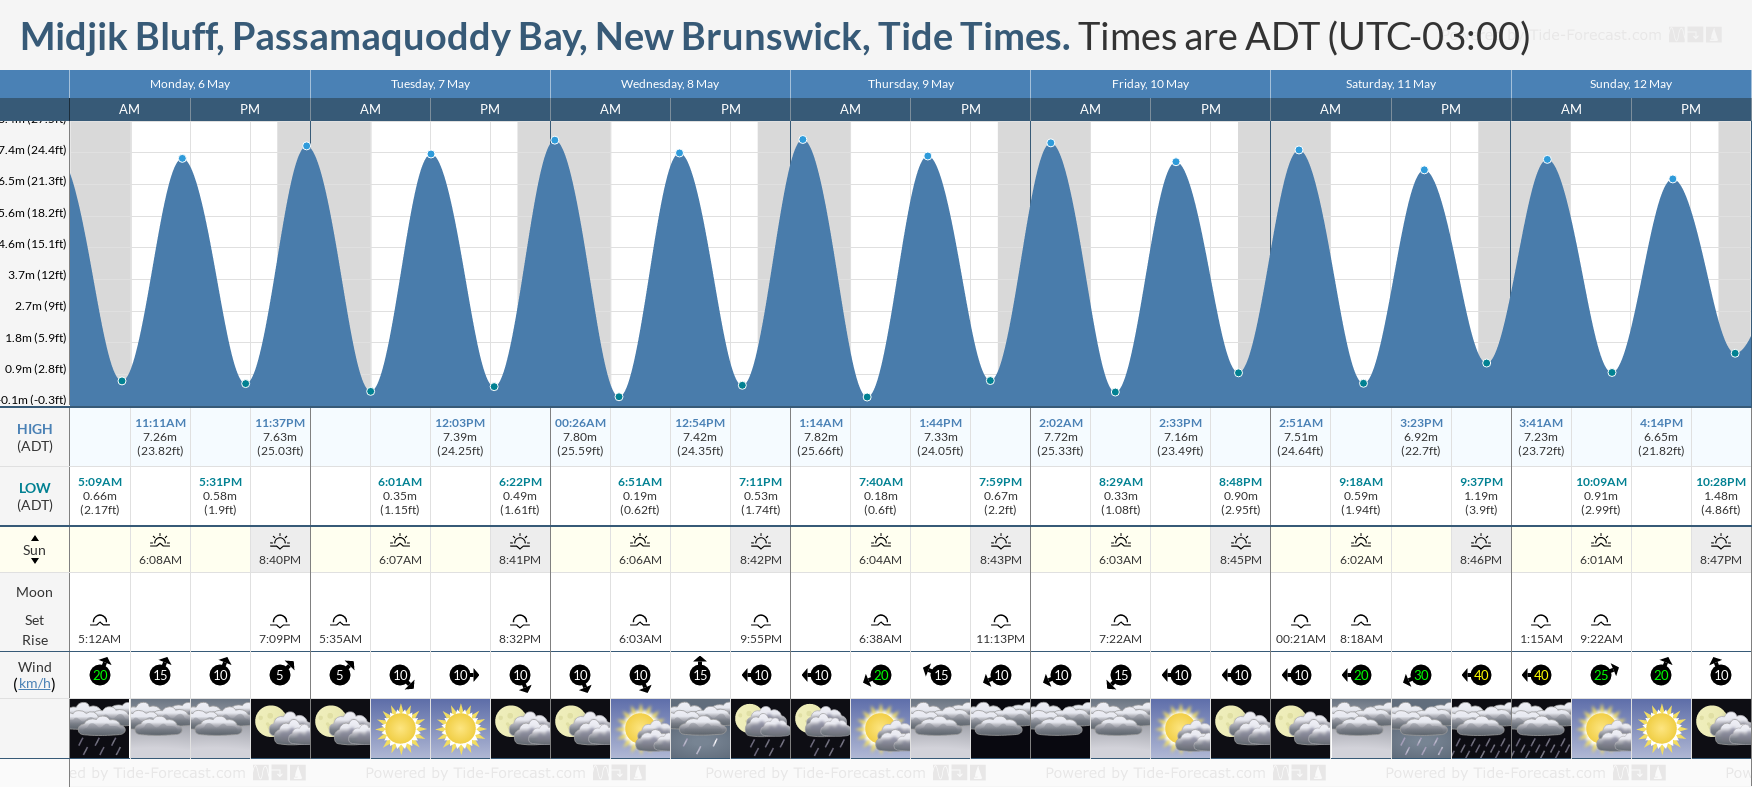 Midjik Bluff, Passamaquoddy Bay, New Brunswick Tide Chart including high and low tide times for the next 7 days